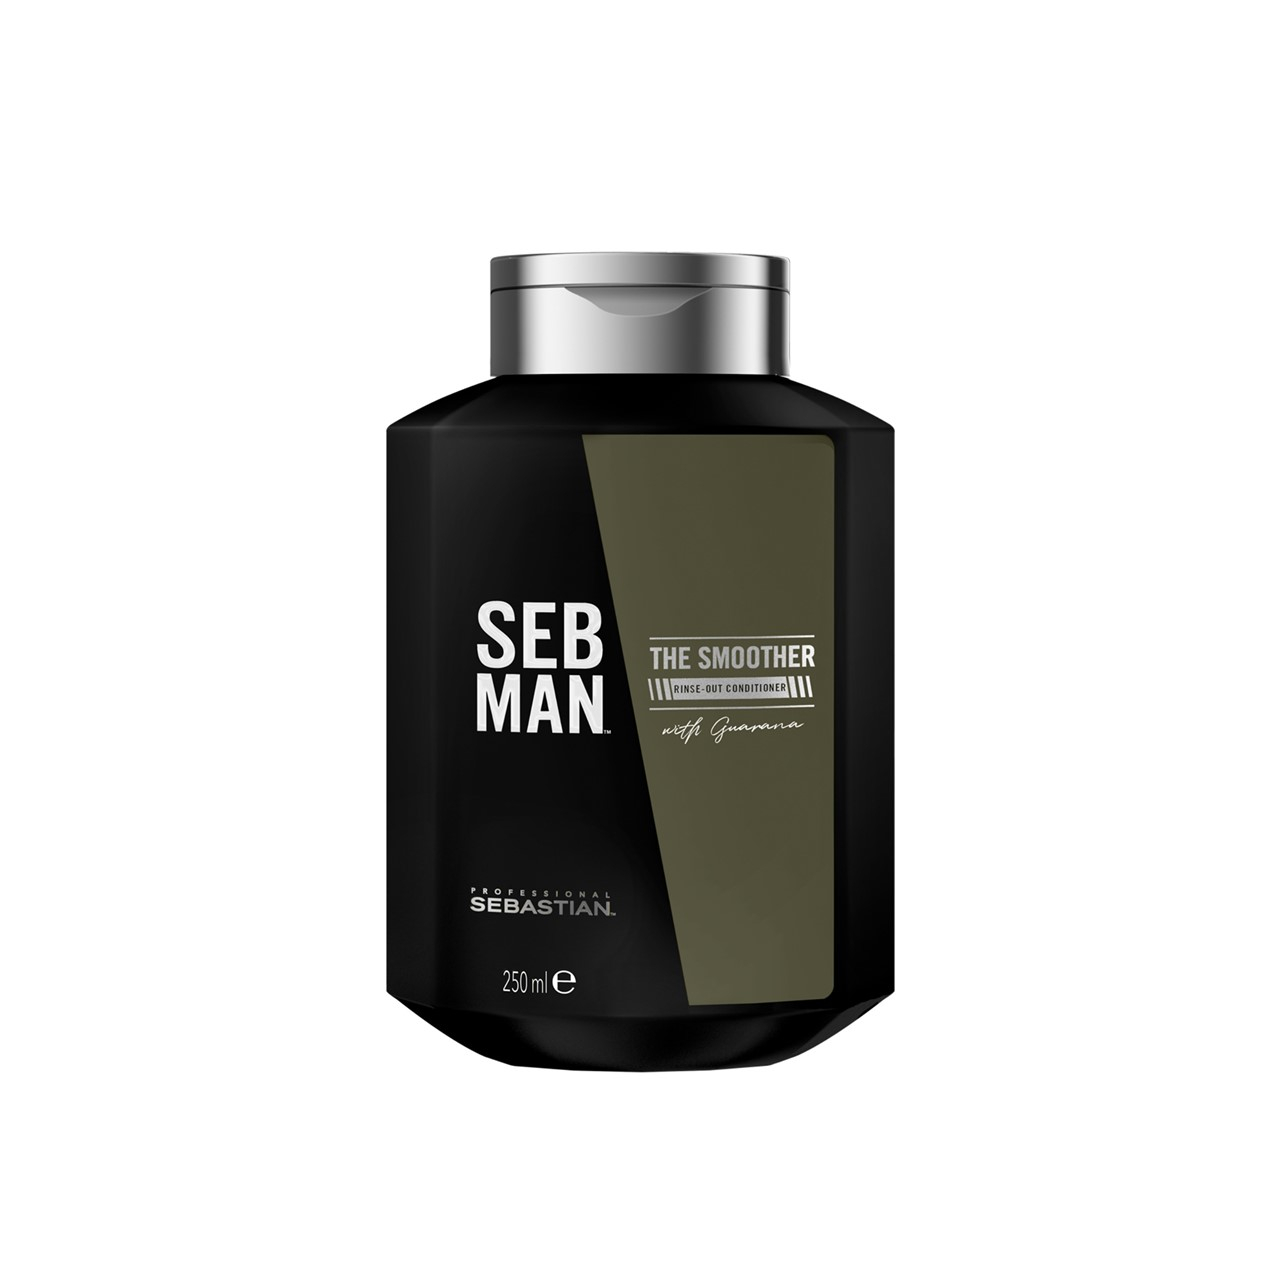 Sebastian SEB MAN The Smoother Rinse-Out Conditioner 250ml (8.45fl oz)